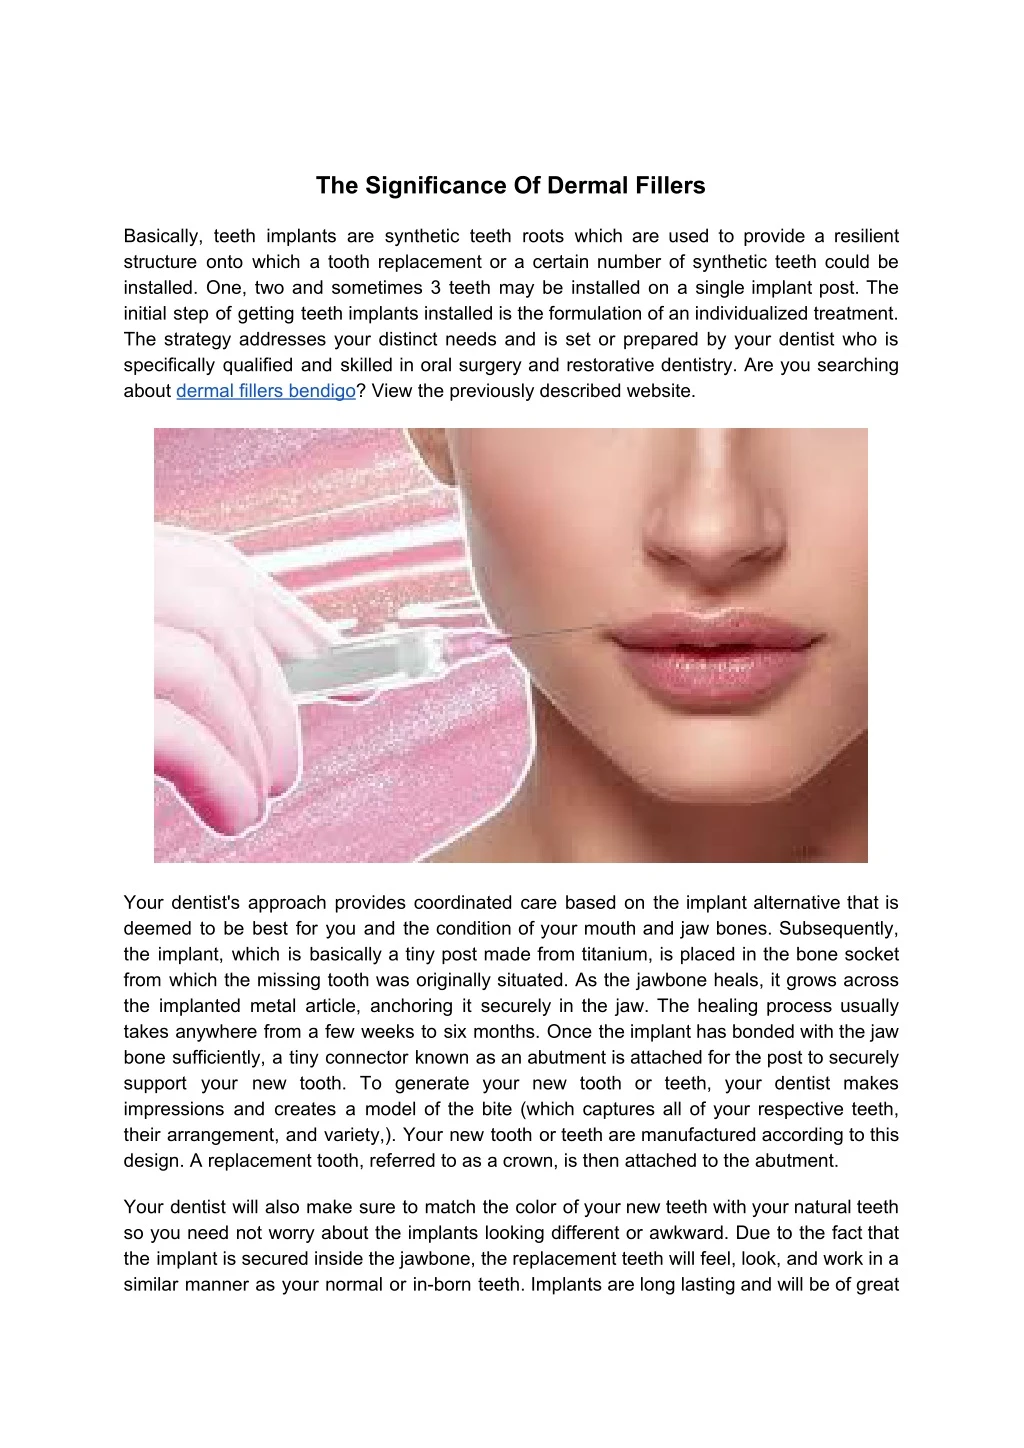 the significance of dermal fillers